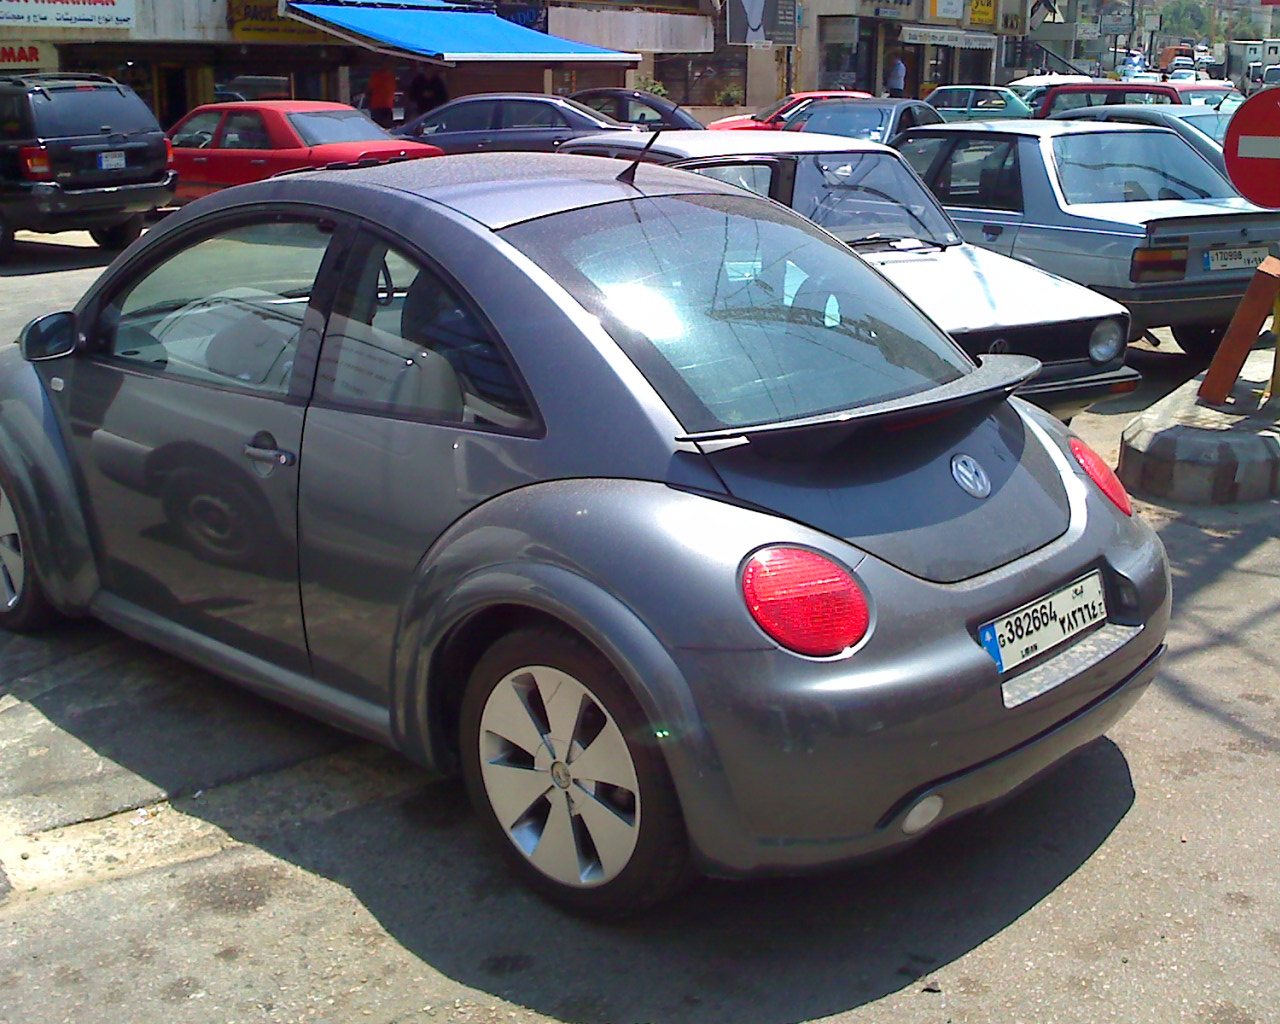 RoJ - Great cars for cheap prices: VW Beetle 2002 F.O 10500